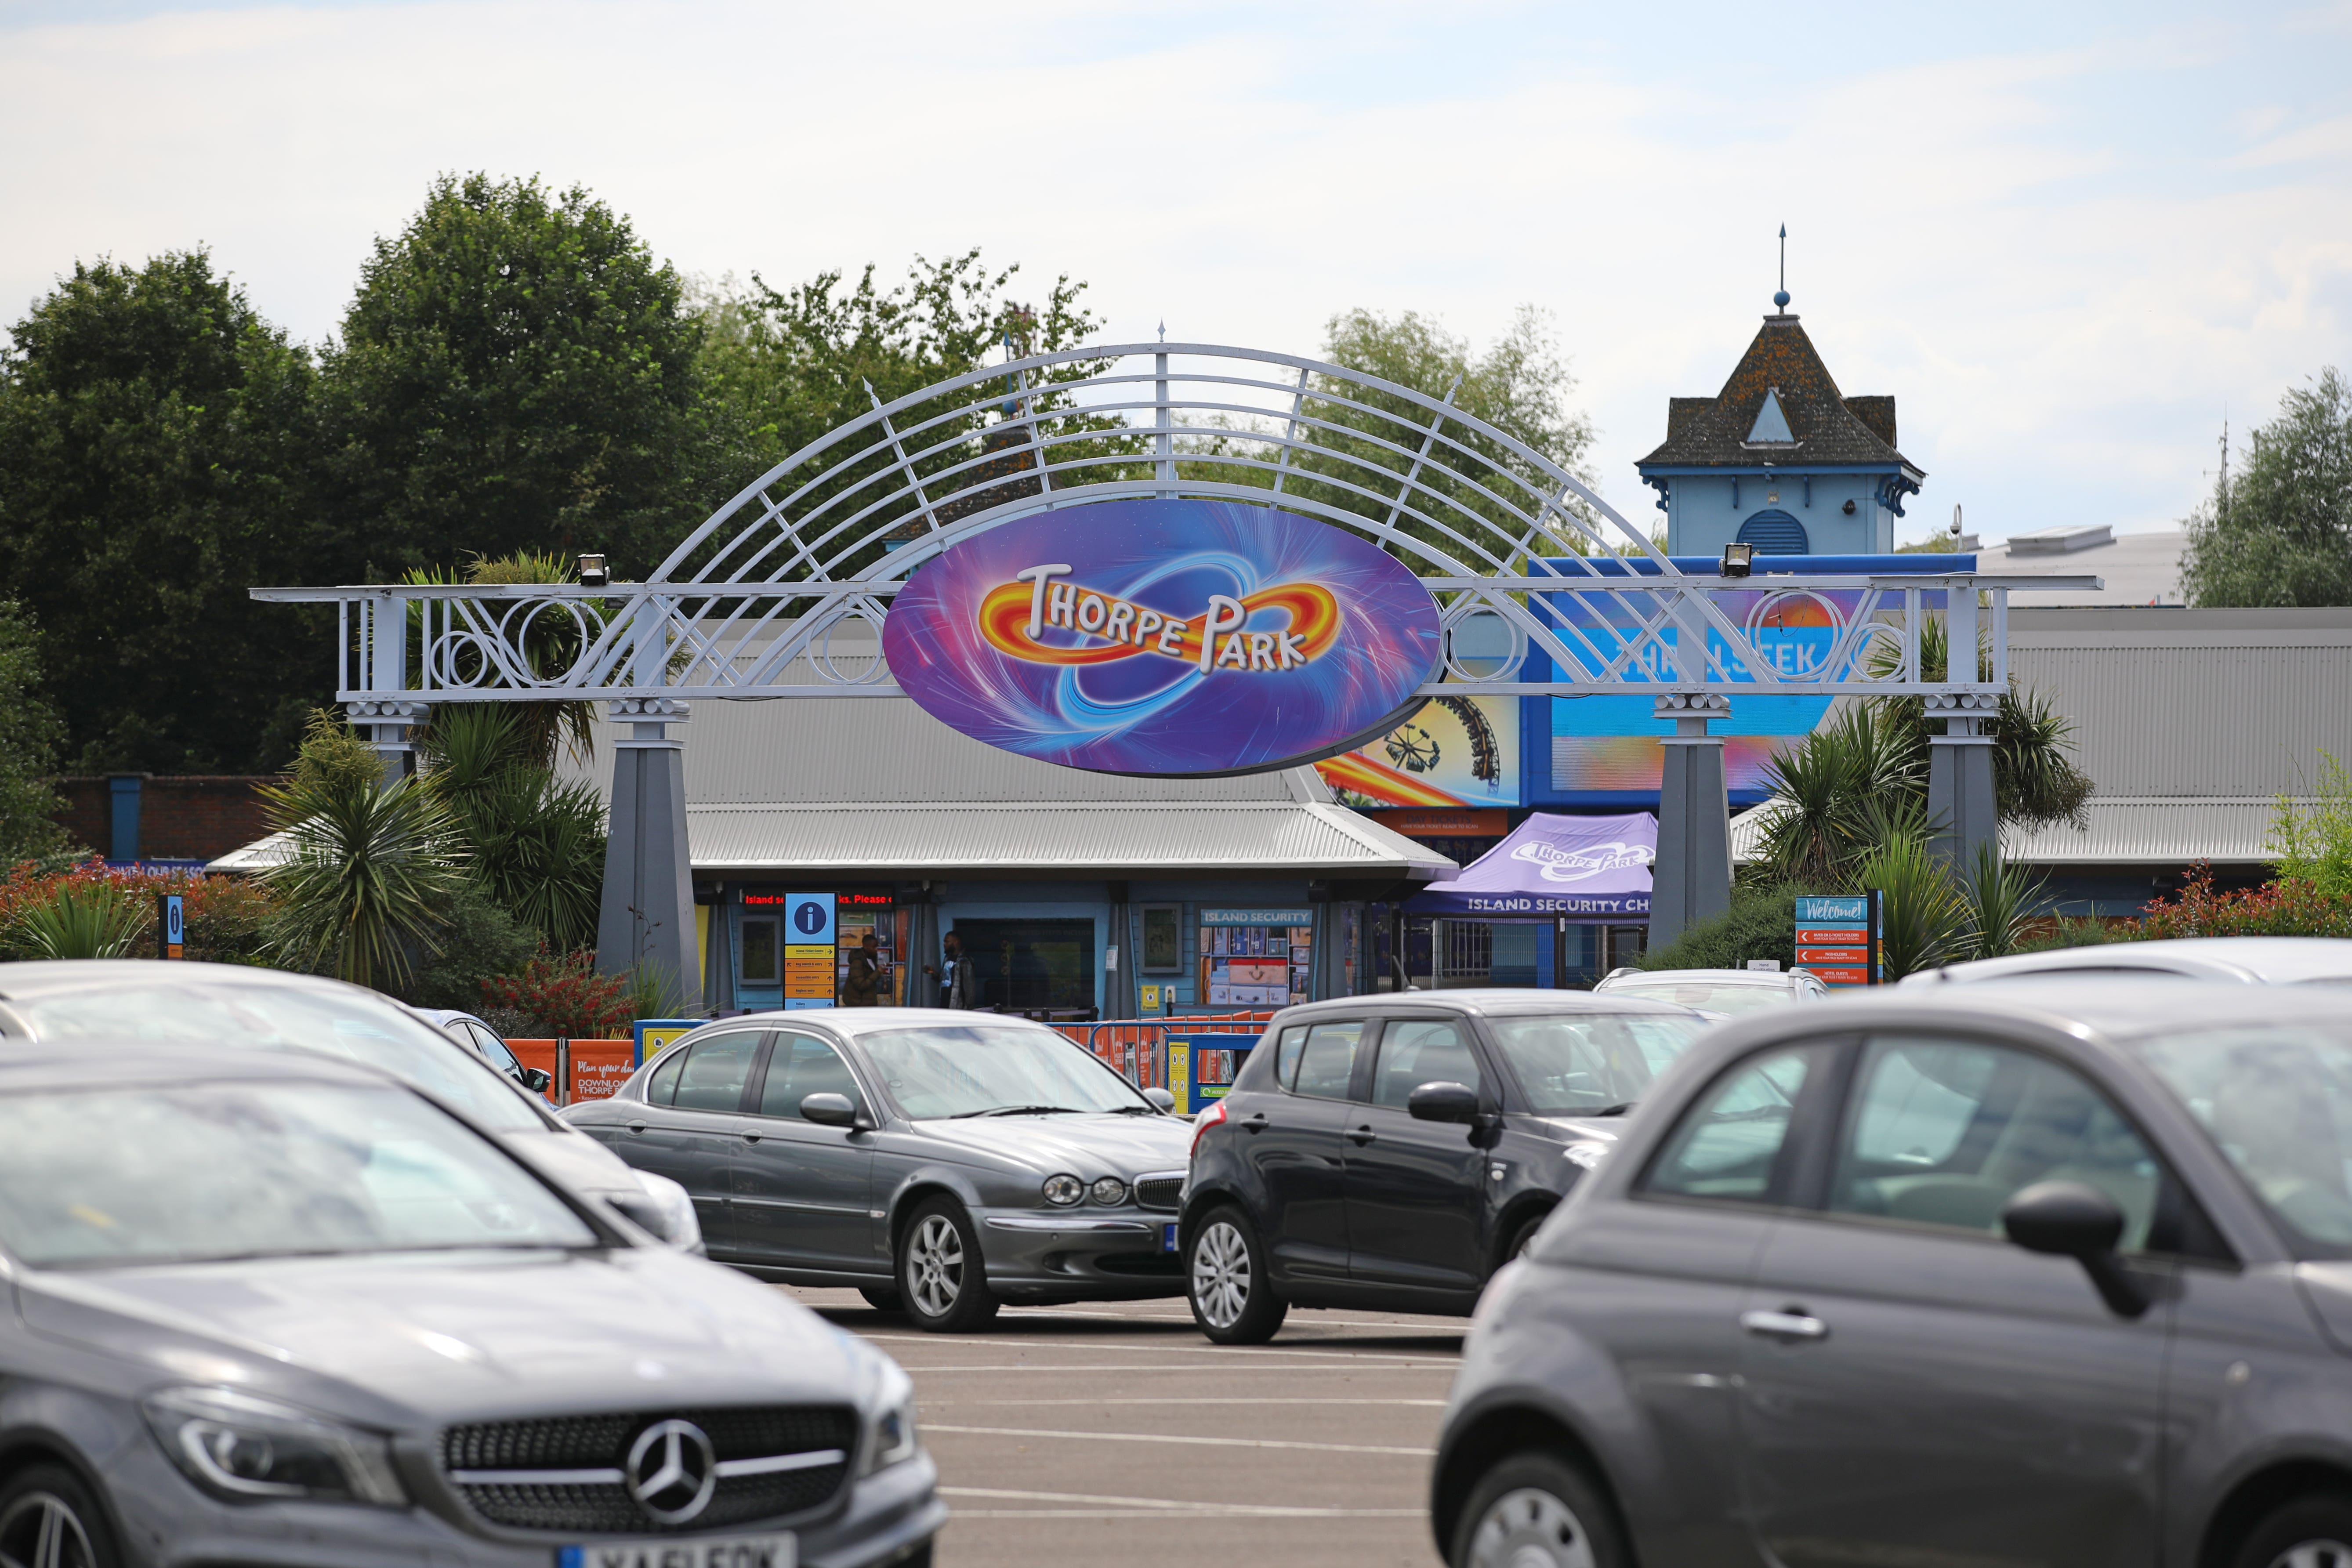 The children have gone missing after leaving Thorpe Park in Surrey (PA)